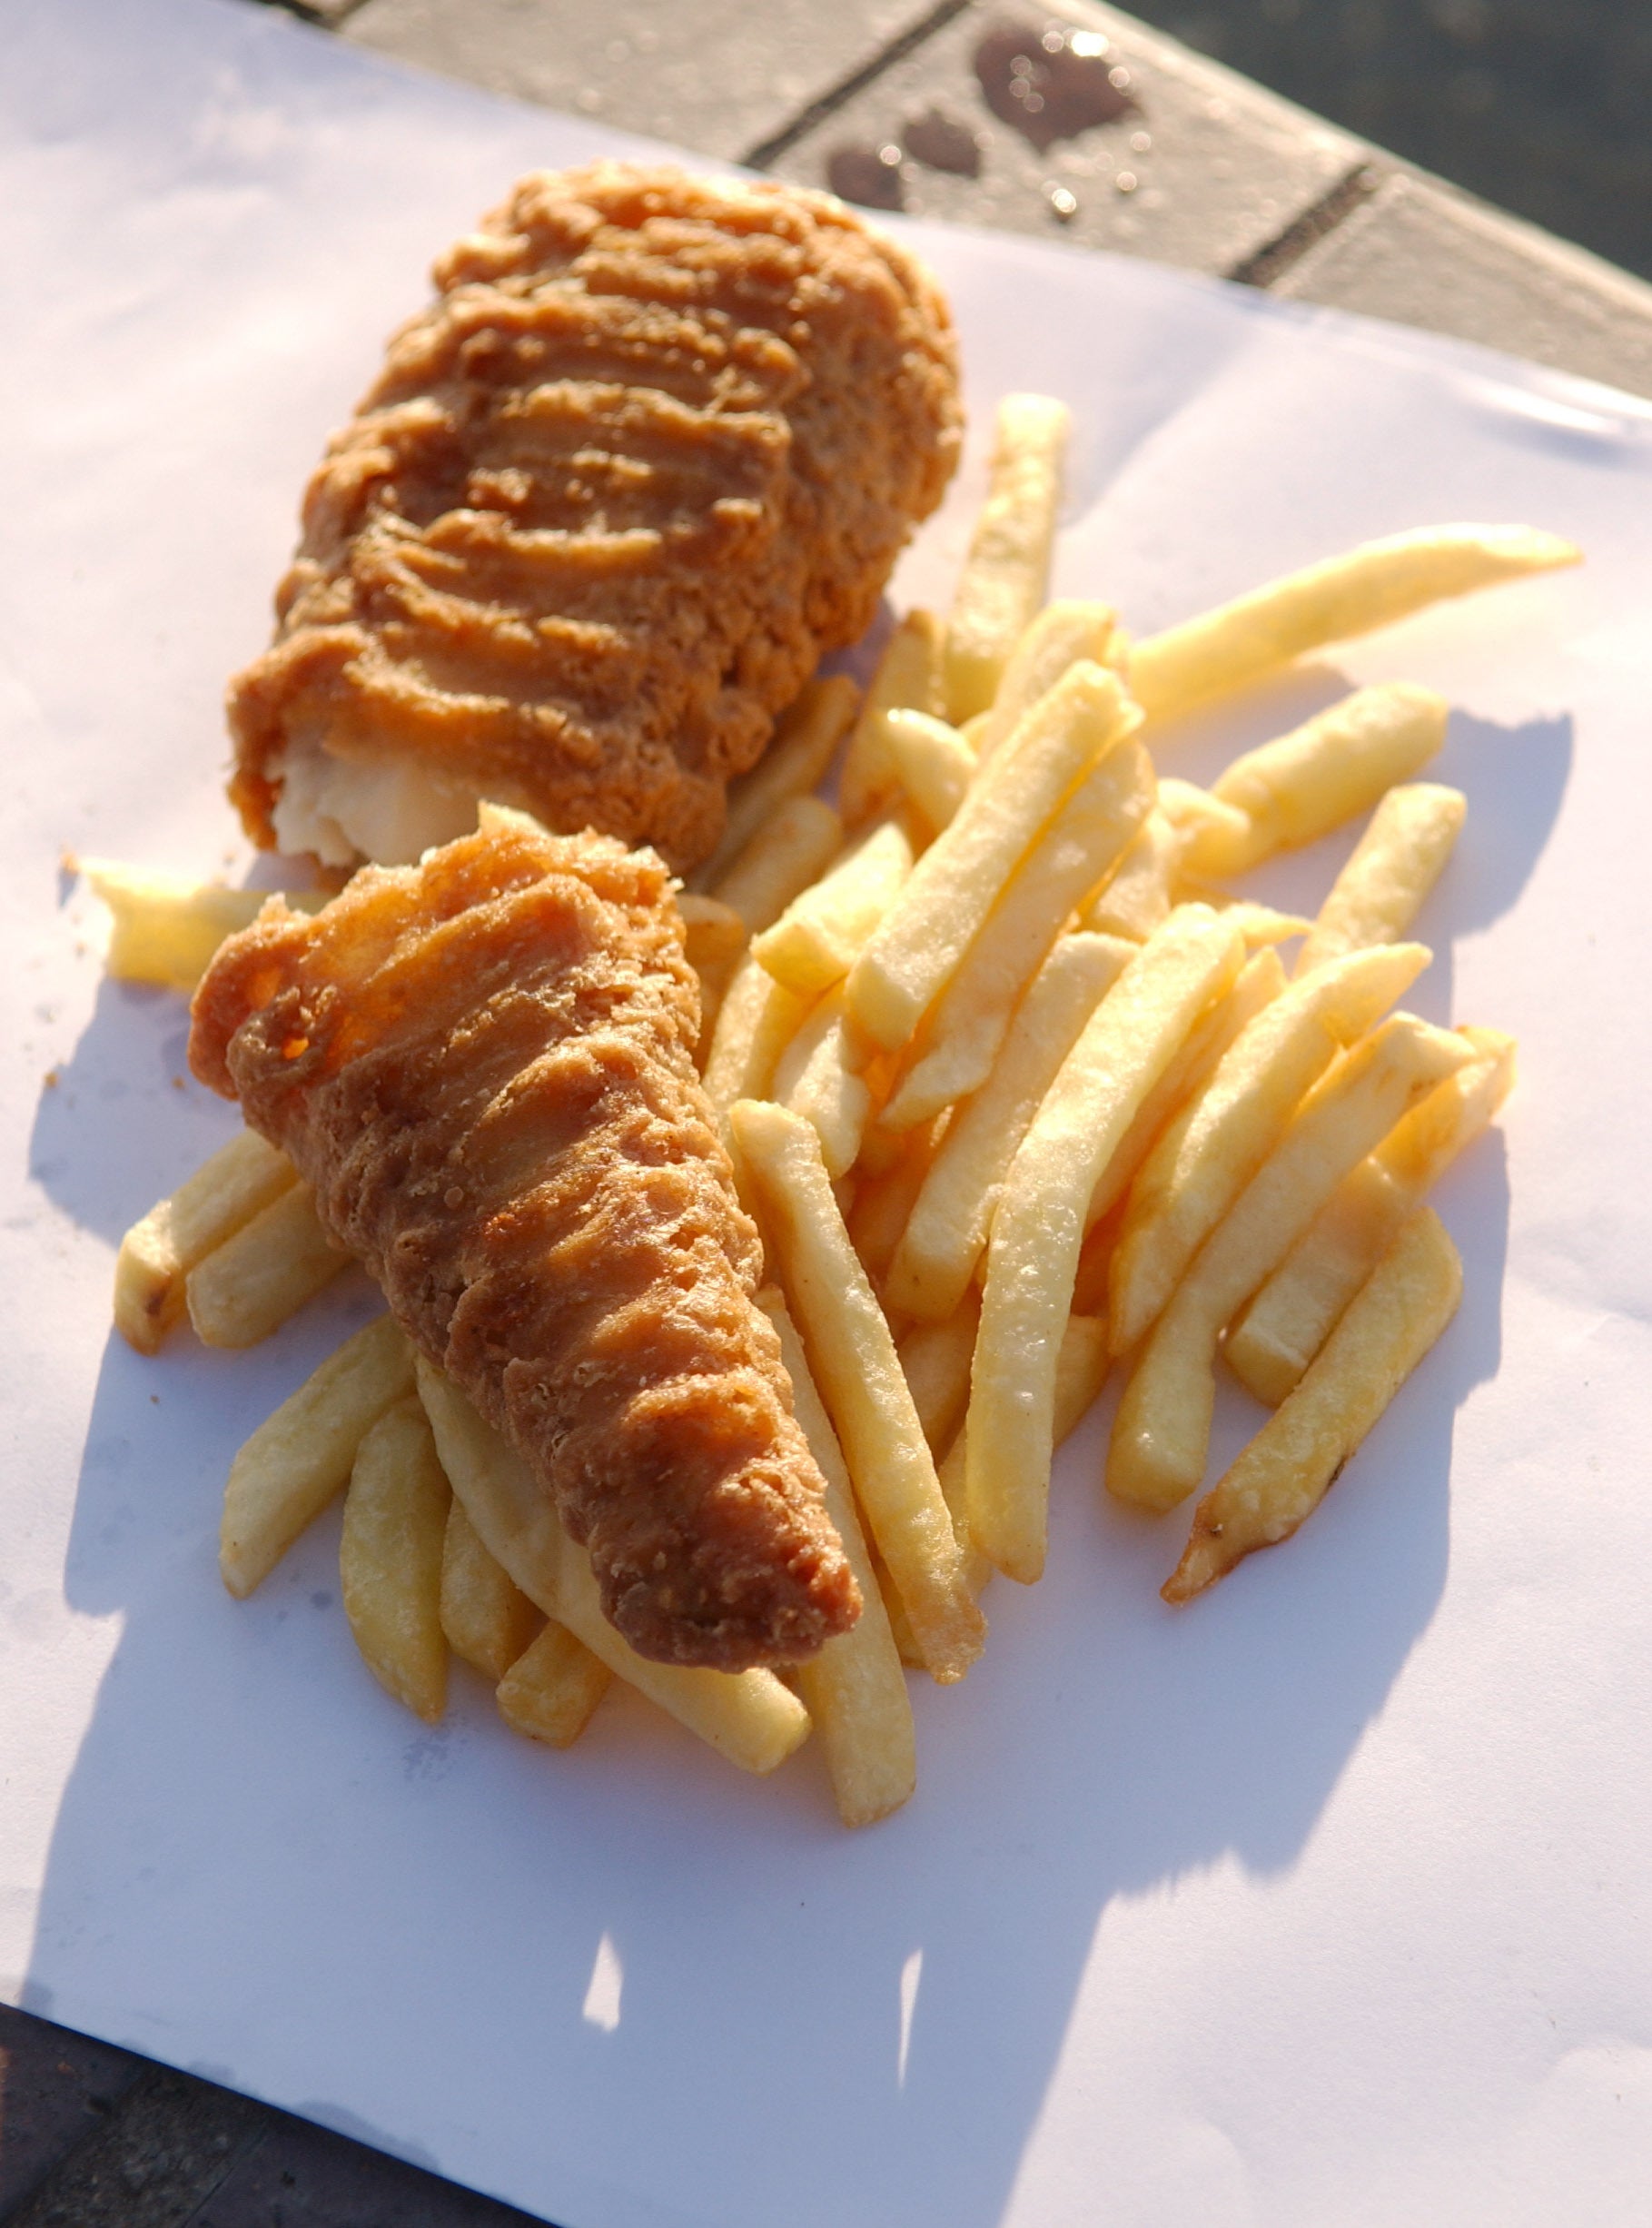 A third of Britain’s chippies are concerned they will have to close if there are shortages of whitefish and oil